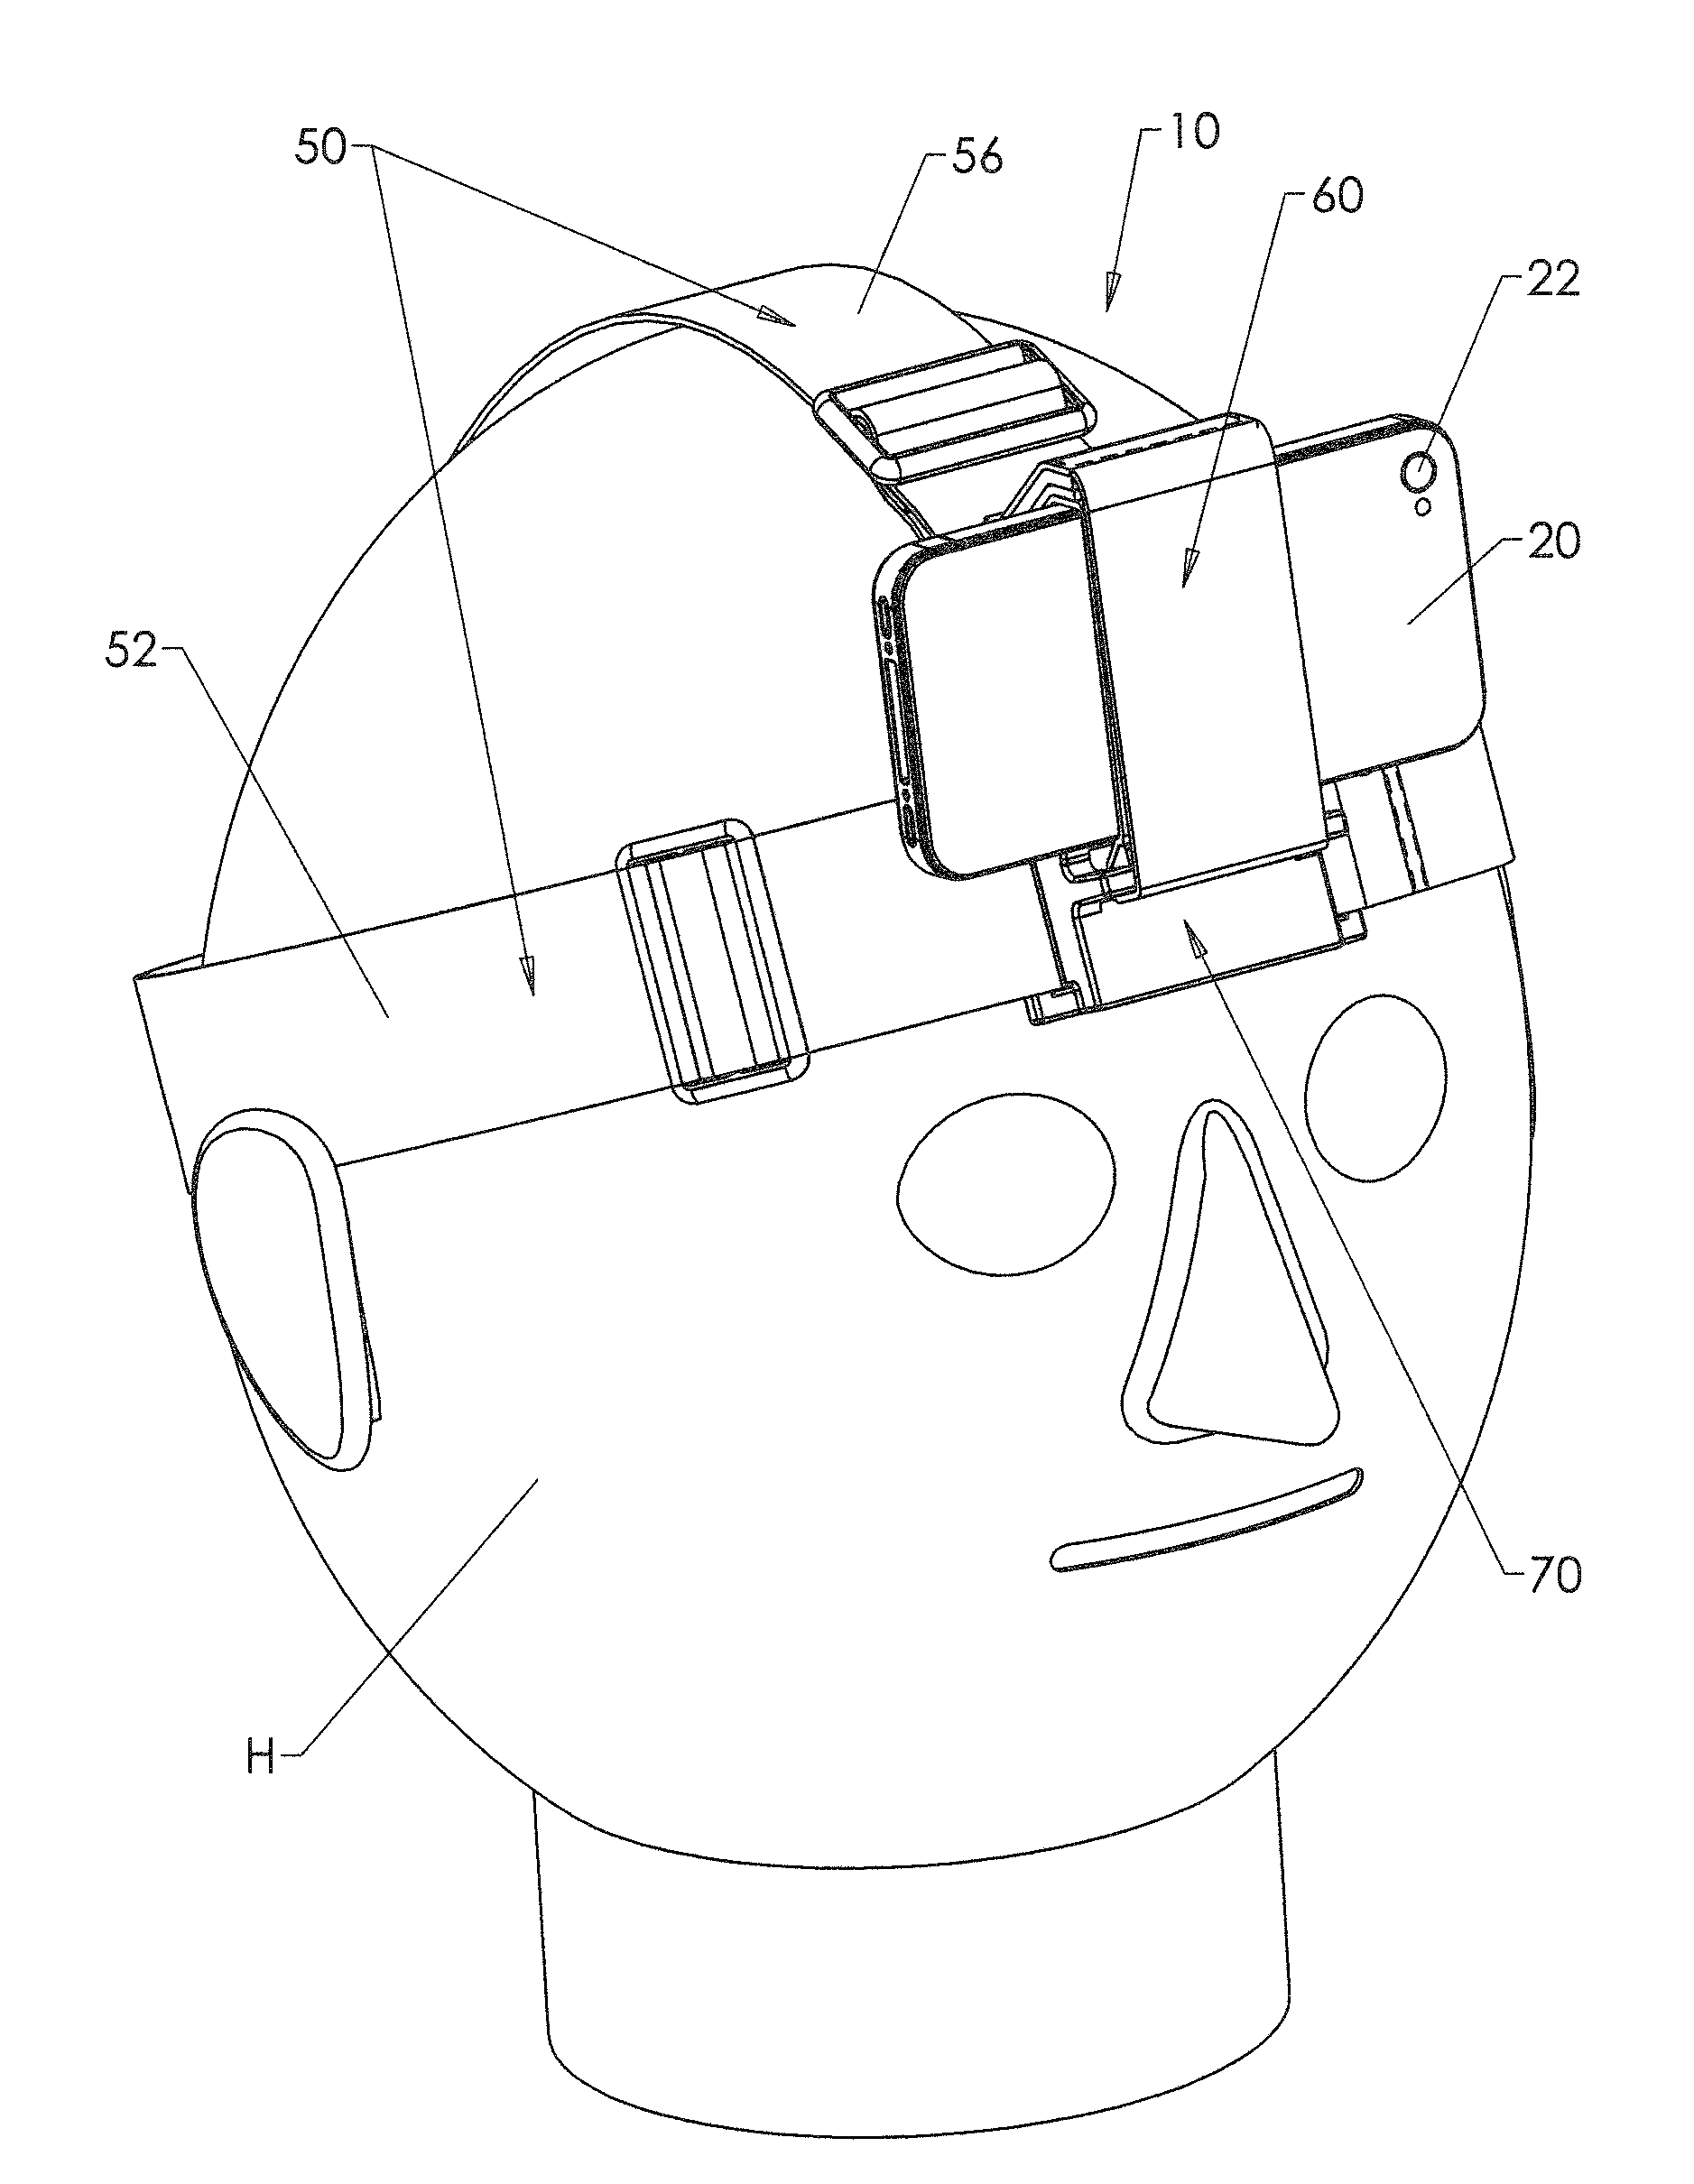 Head Mount Apparatus For Hands-Free Video Recording With An Electronic Device